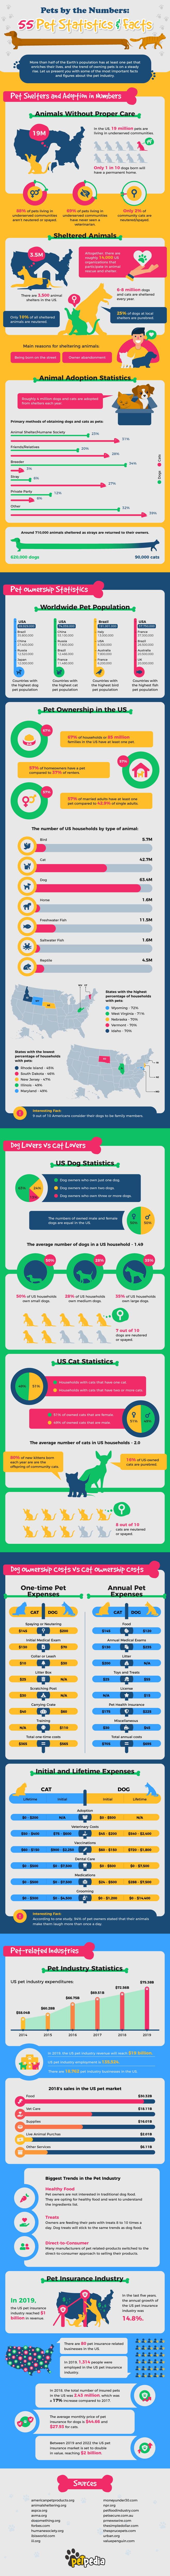 Pets by the Numbers: 55 Pet Statistics & Facts